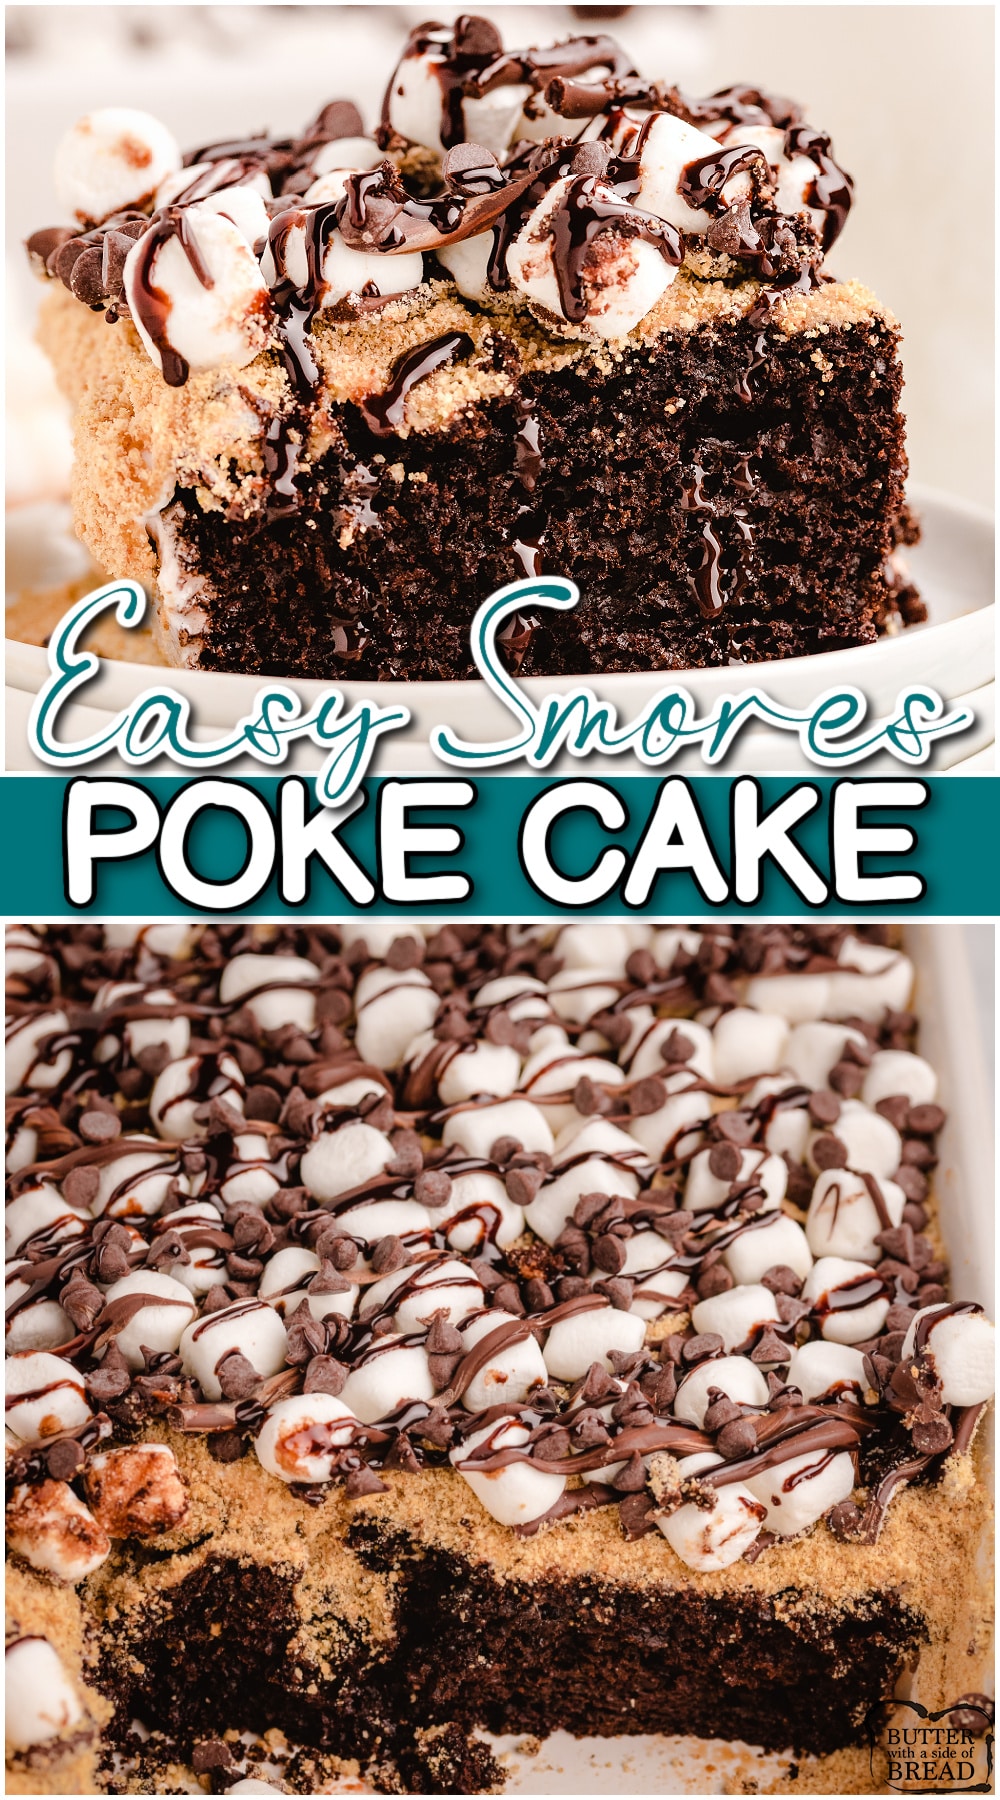 S'mores Poke Cake made with a chocolate cake mix topped with marshmallow cream, graham cracker crumbs, mini marshmallows & chocolate drizzle! S'mores in poke cake form that everyone enjoys!